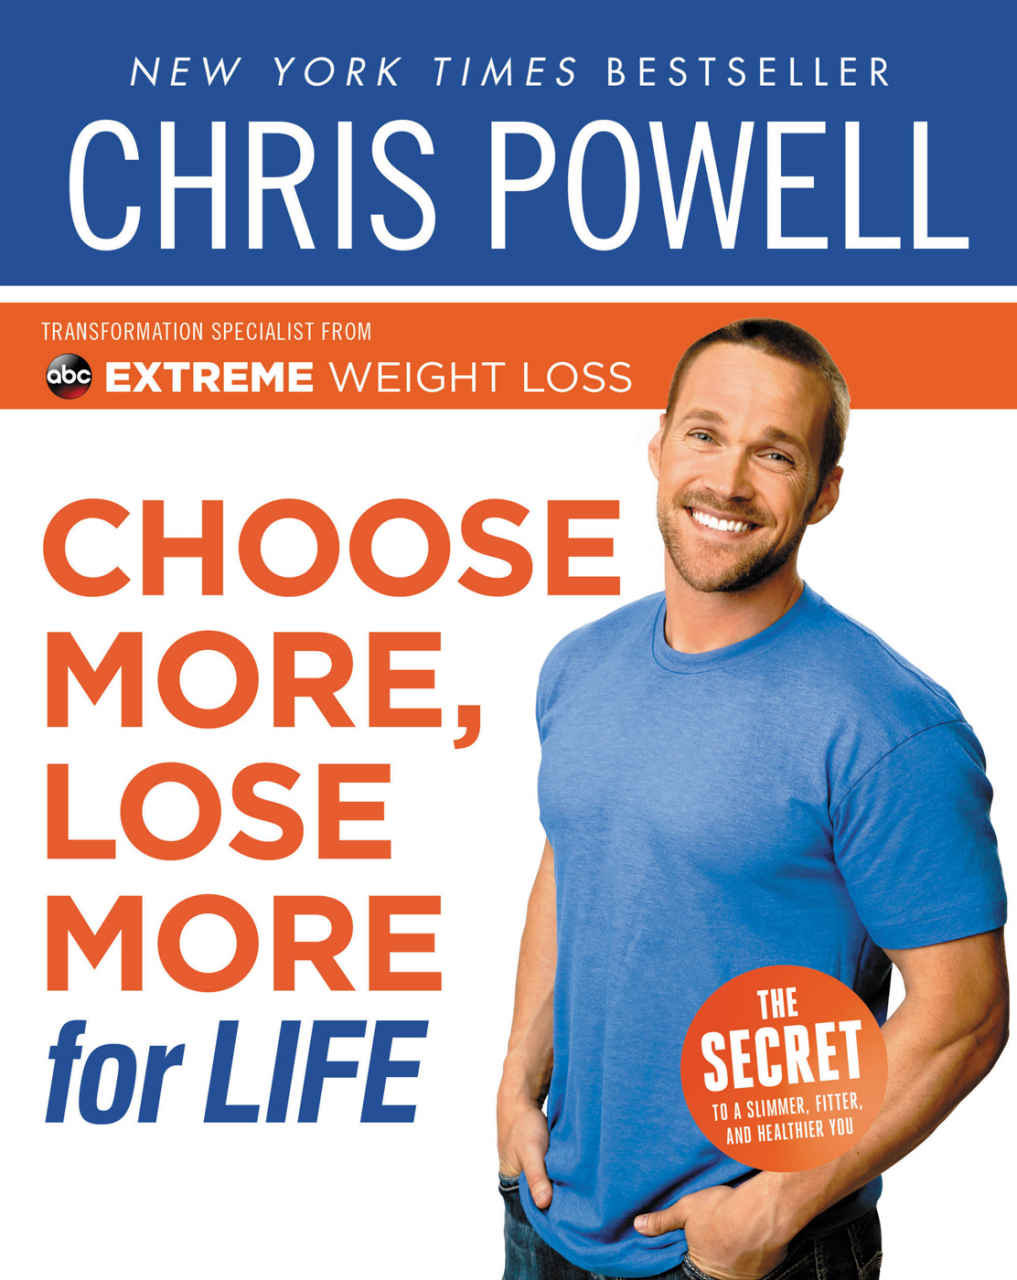 Chris Powell – Choose More, Lose More For Life